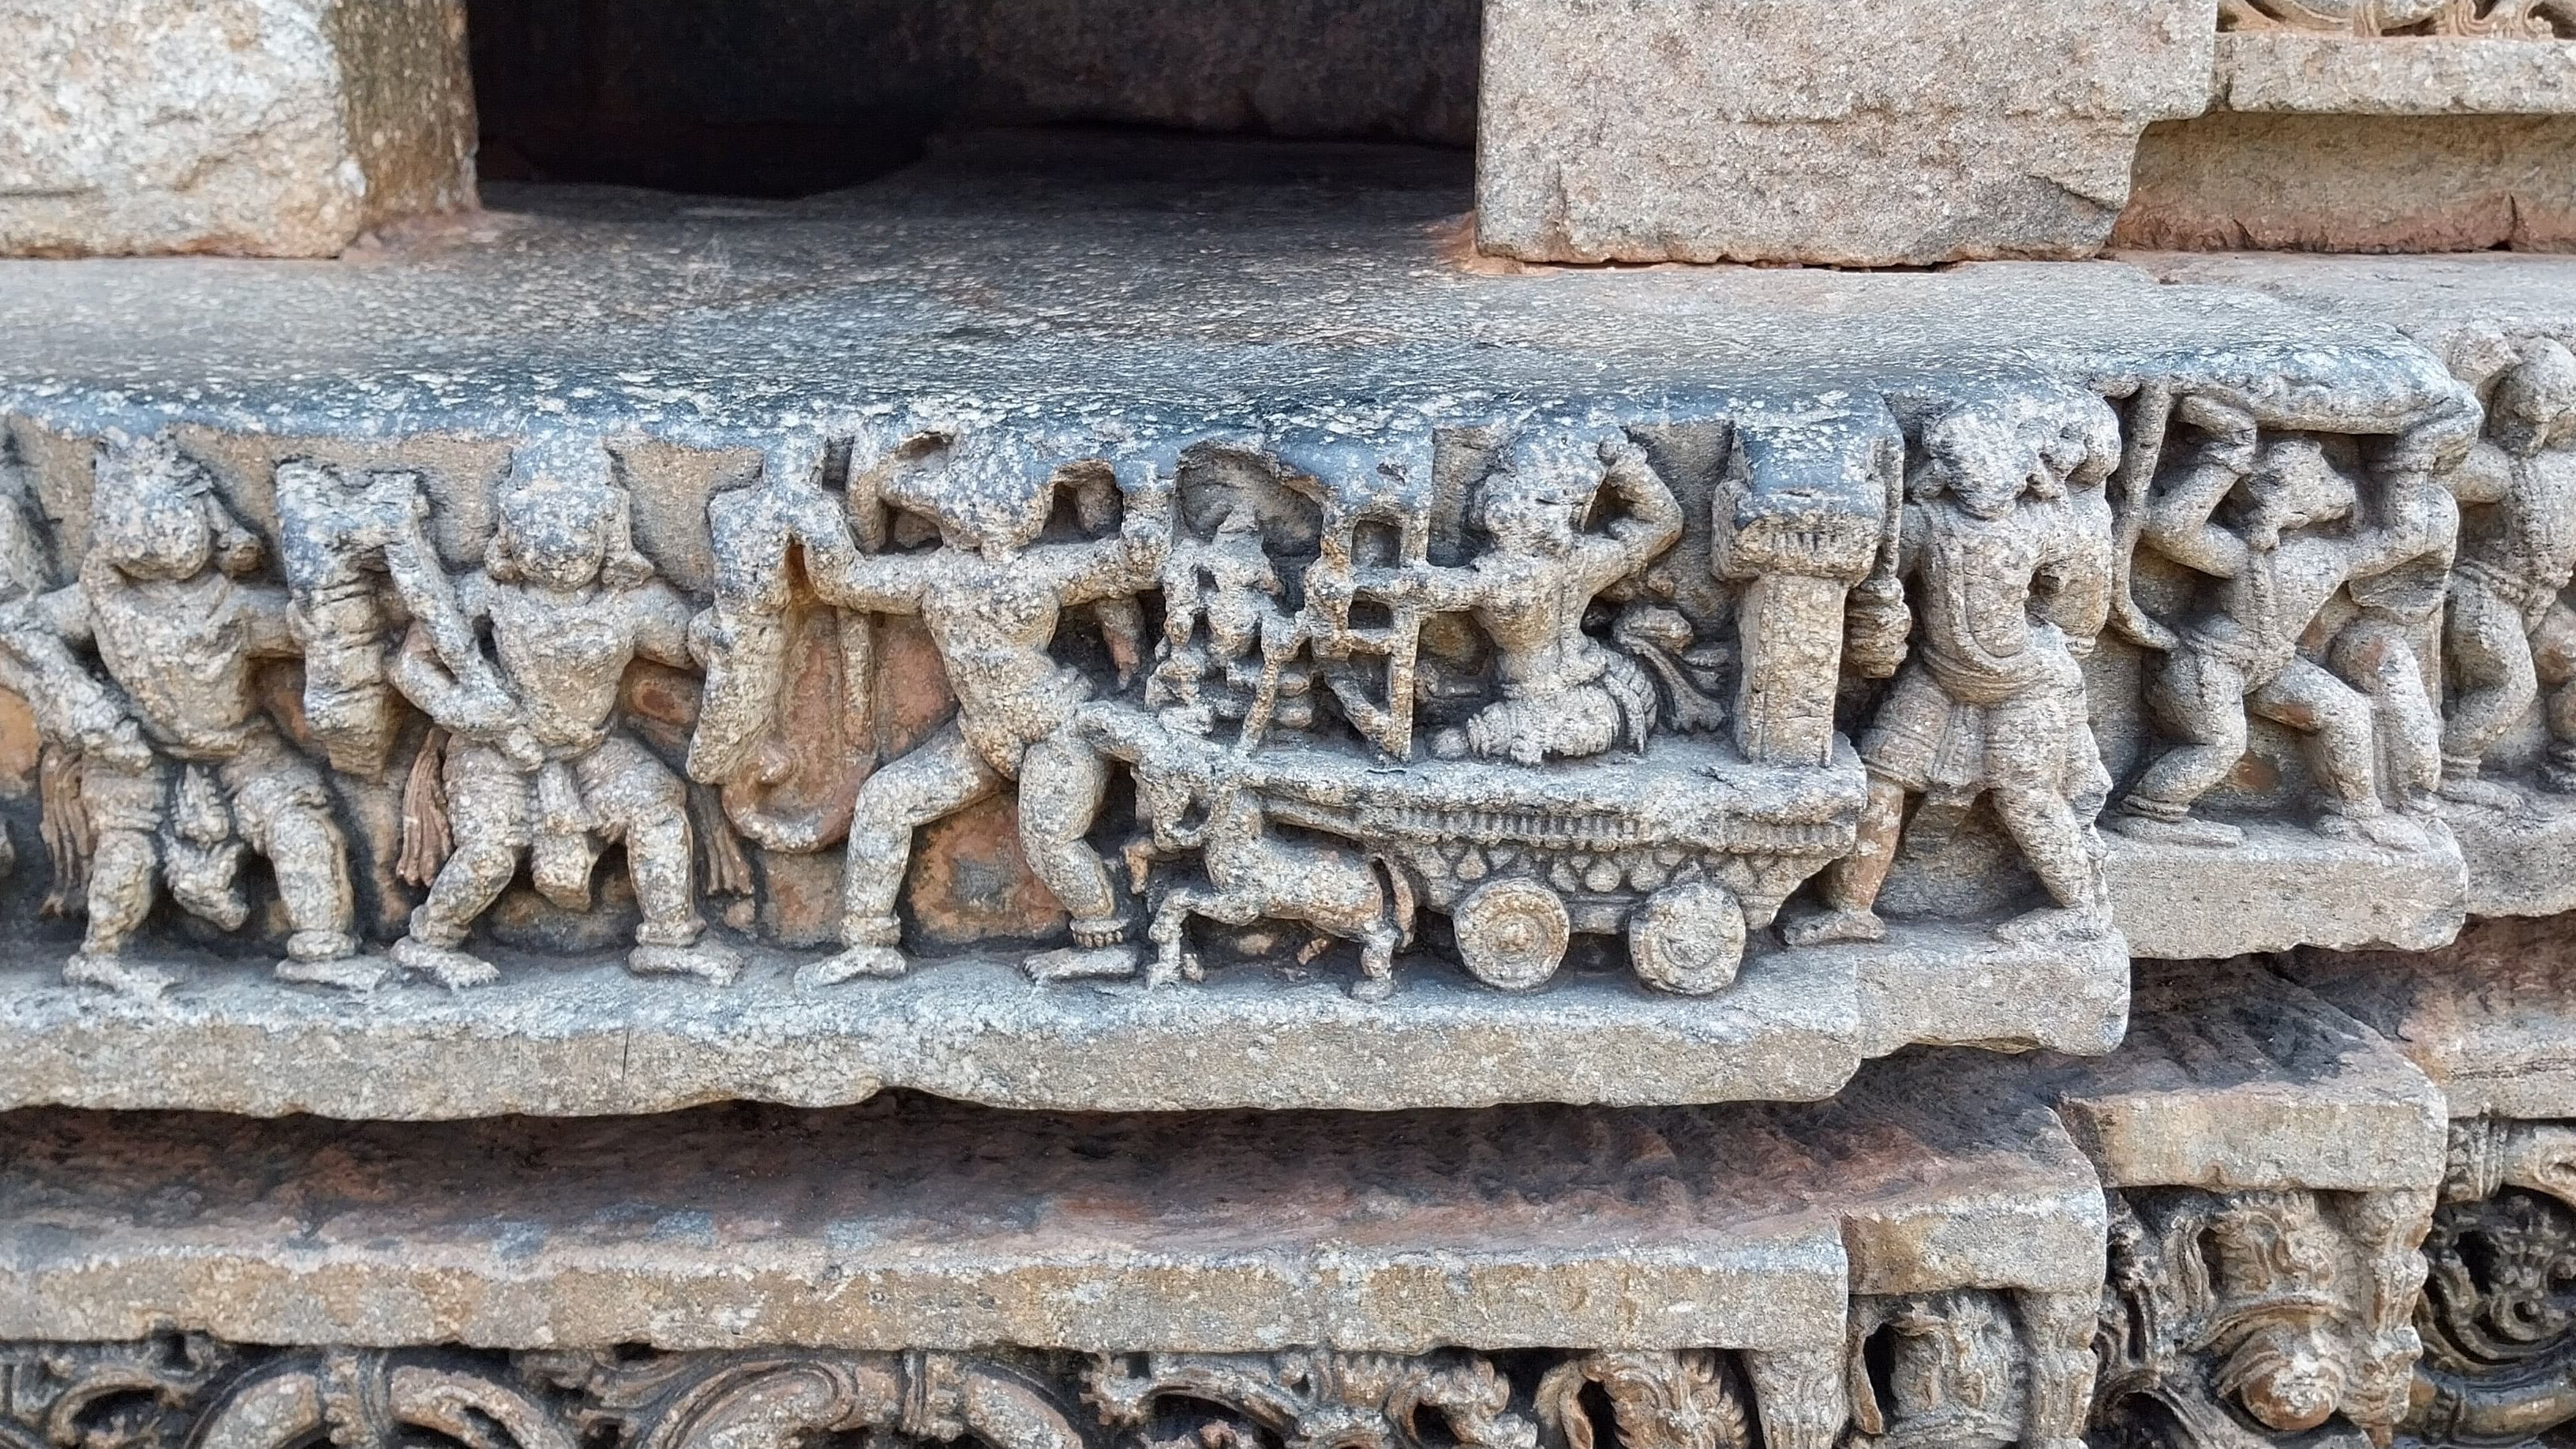 <div class="paragraphs"><p>Carvings featured on the walls of the Lakshminarayana temple in Hosaholalu, which depict scenes from various mythological tales. </p></div>